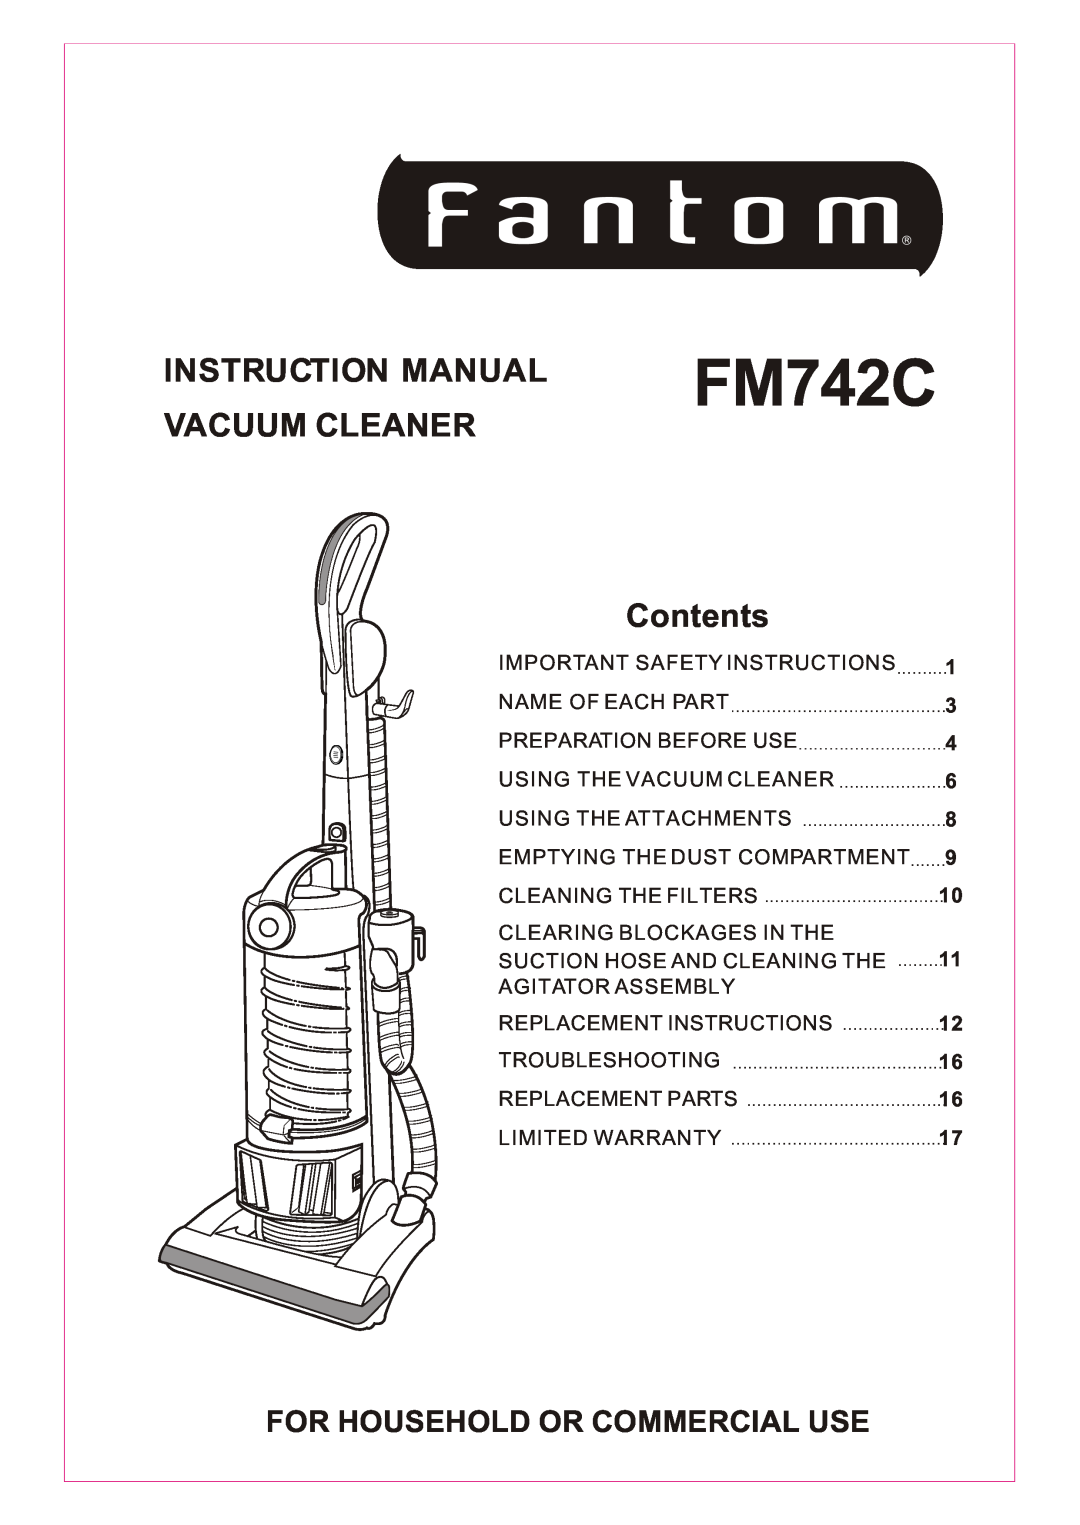 Fantom Vacuum FM742C instruction manual Instruction Manual, VACUUM CLEANER Contents, For Household Or Commercial Use 